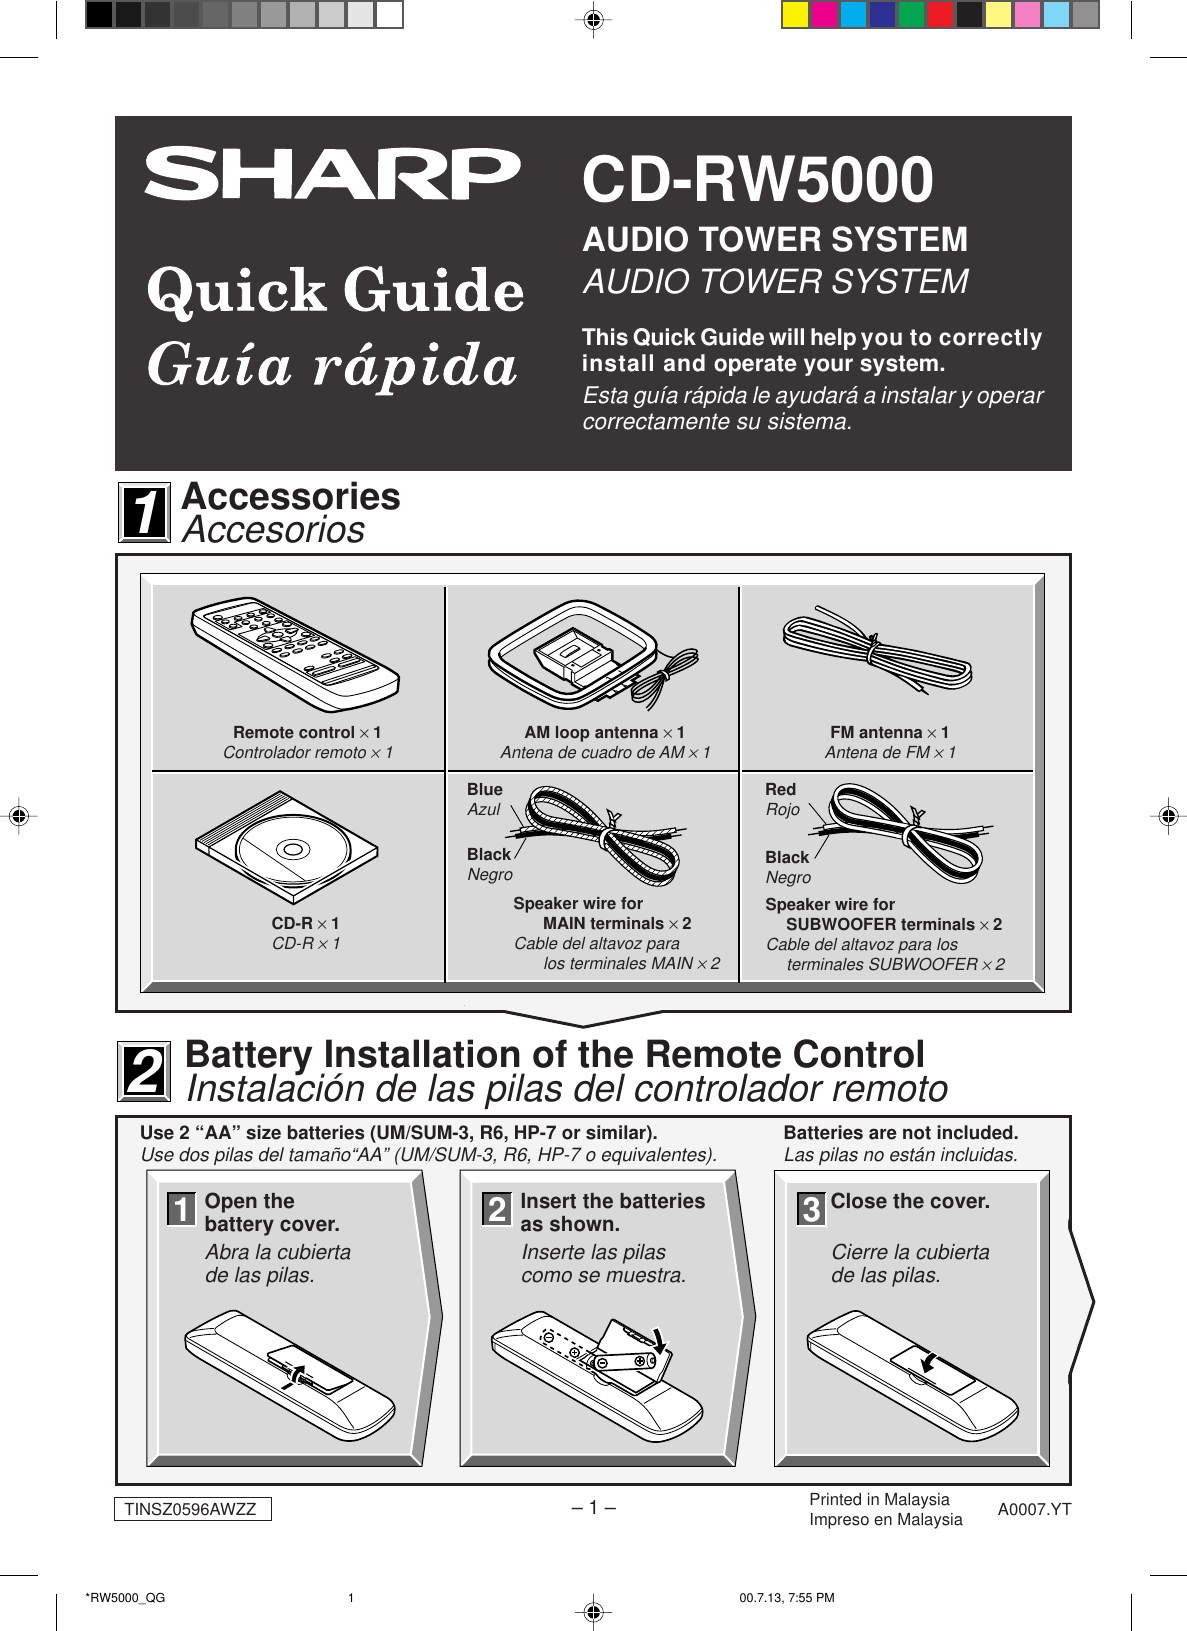 Page 1 of 8 - Sharp Cdrw5000-Quick-Guide CD-RW5000 Quick Start Guide